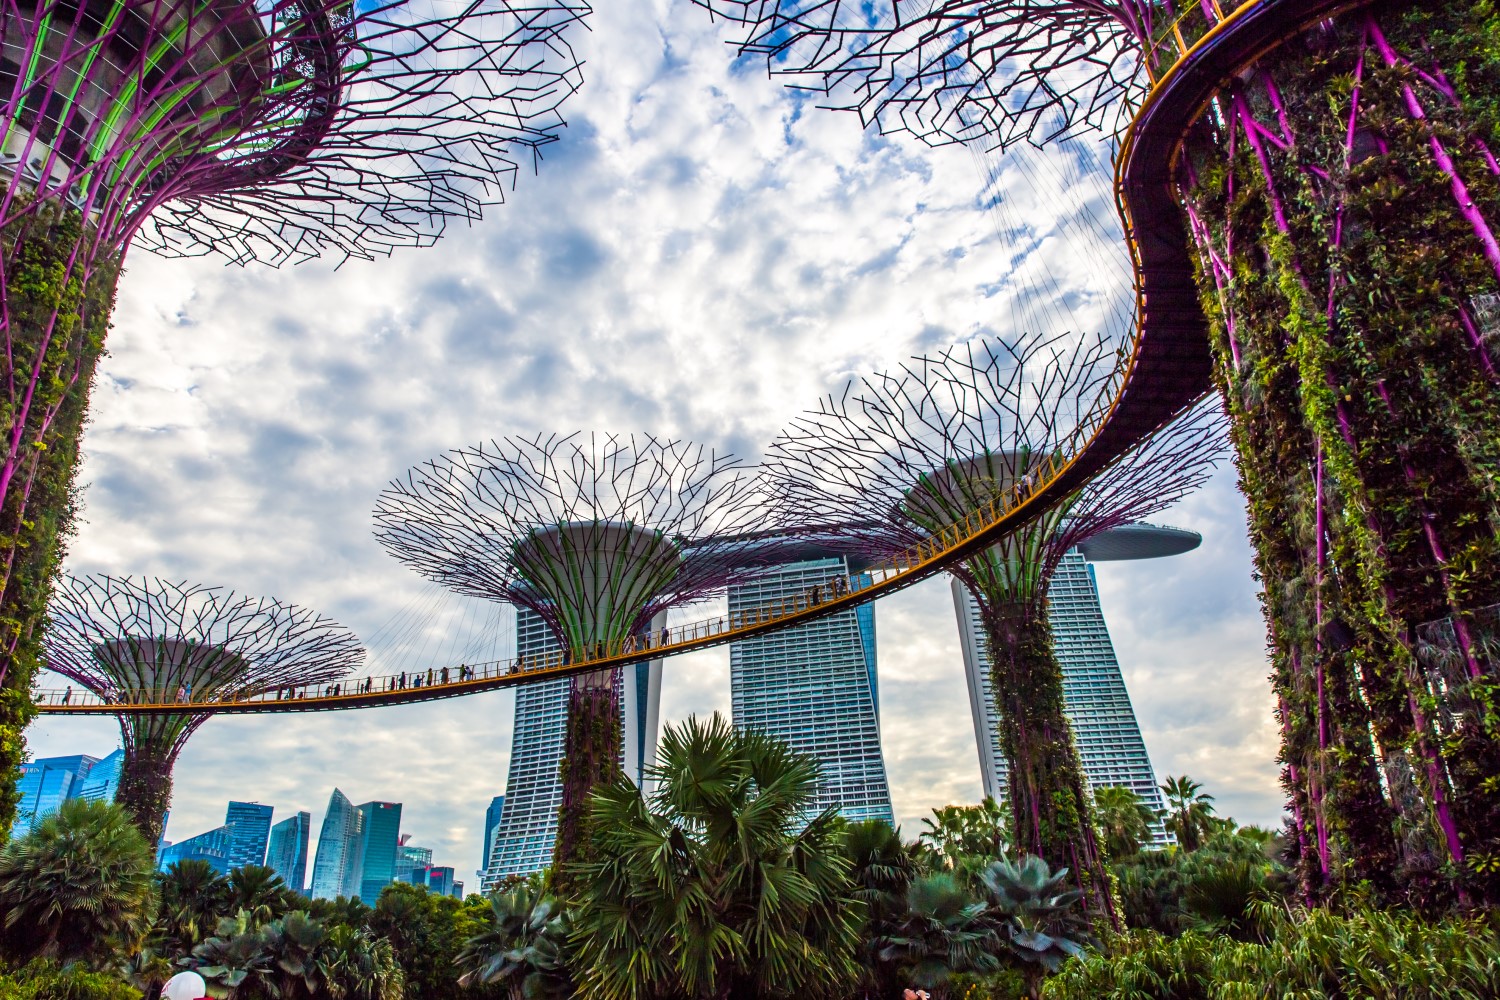 Singapore’s Tax Agency Proposes To Exempt Cryptos From GST